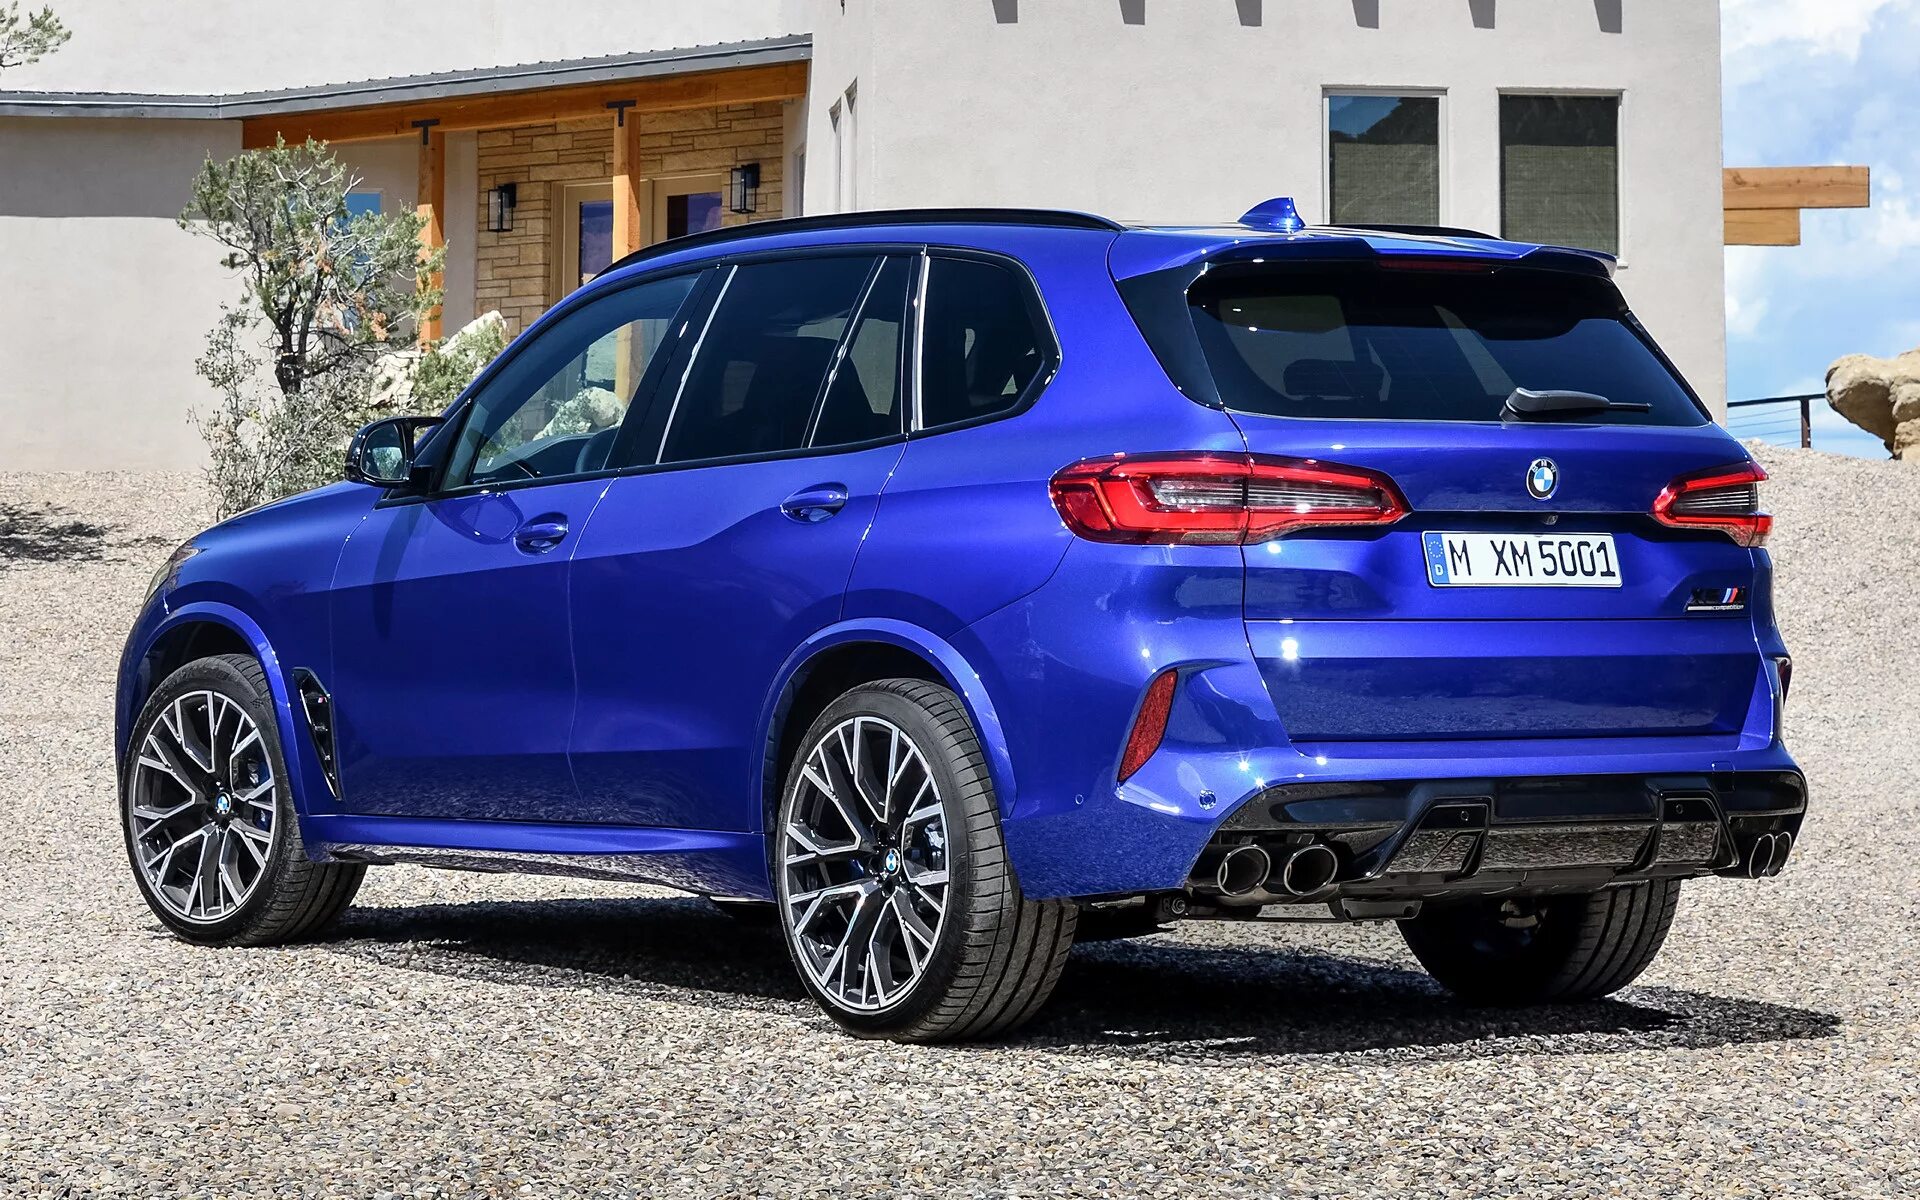 BMW x5m f95. X5m 2021. БМВ x5m Competition 2021. BMW x5m f95 Competition.